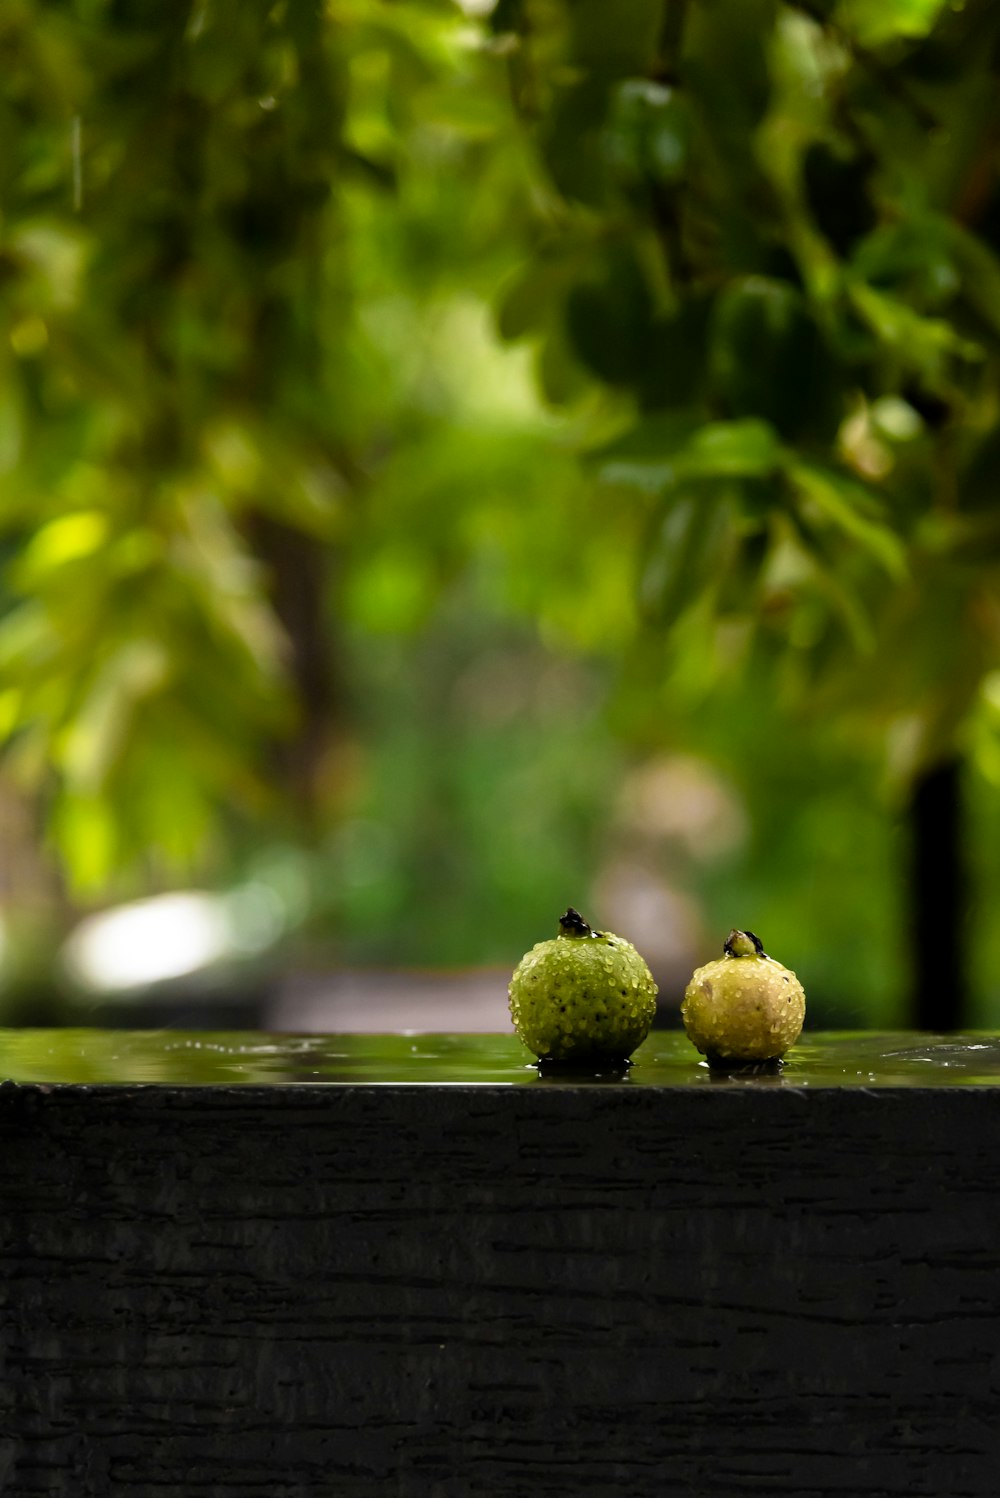 two fruits on wooden surface